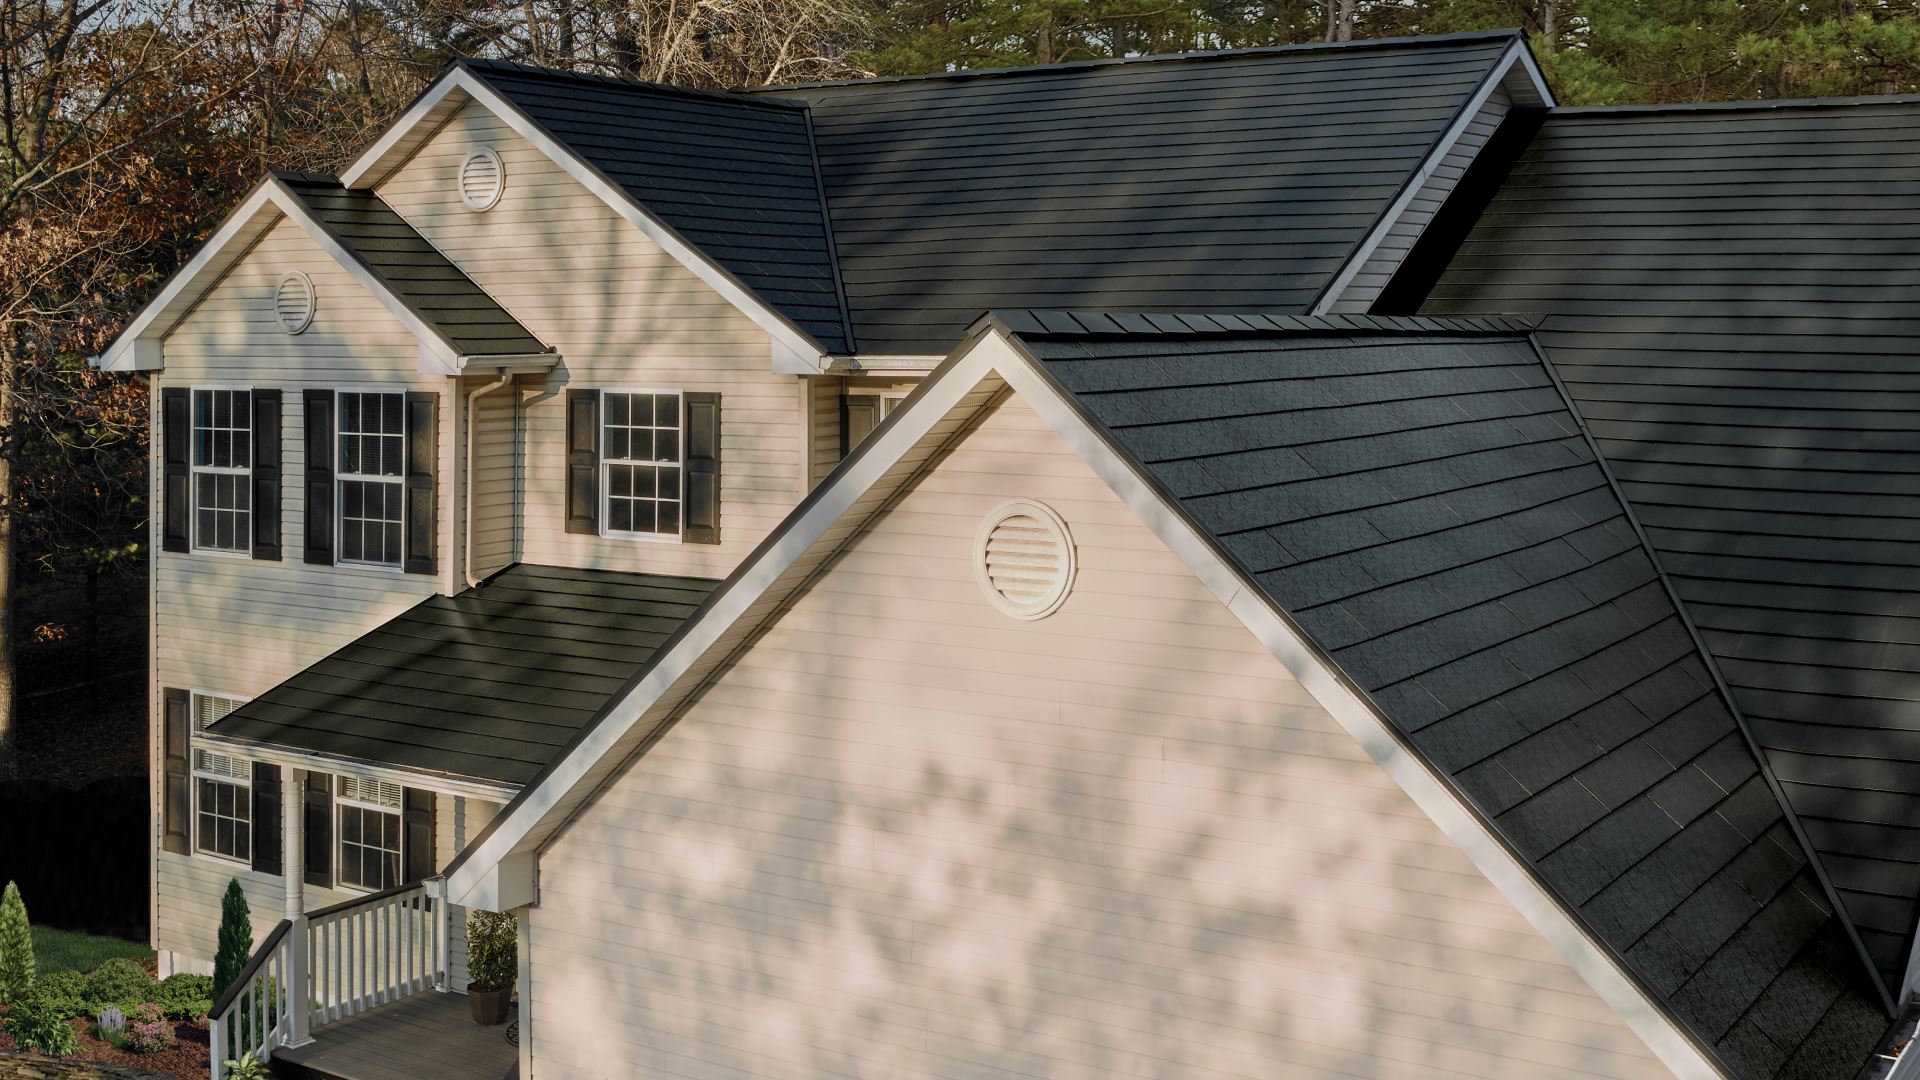 Close-up of TimberSteel metal roof on home with ArmorPledge Warranty badge